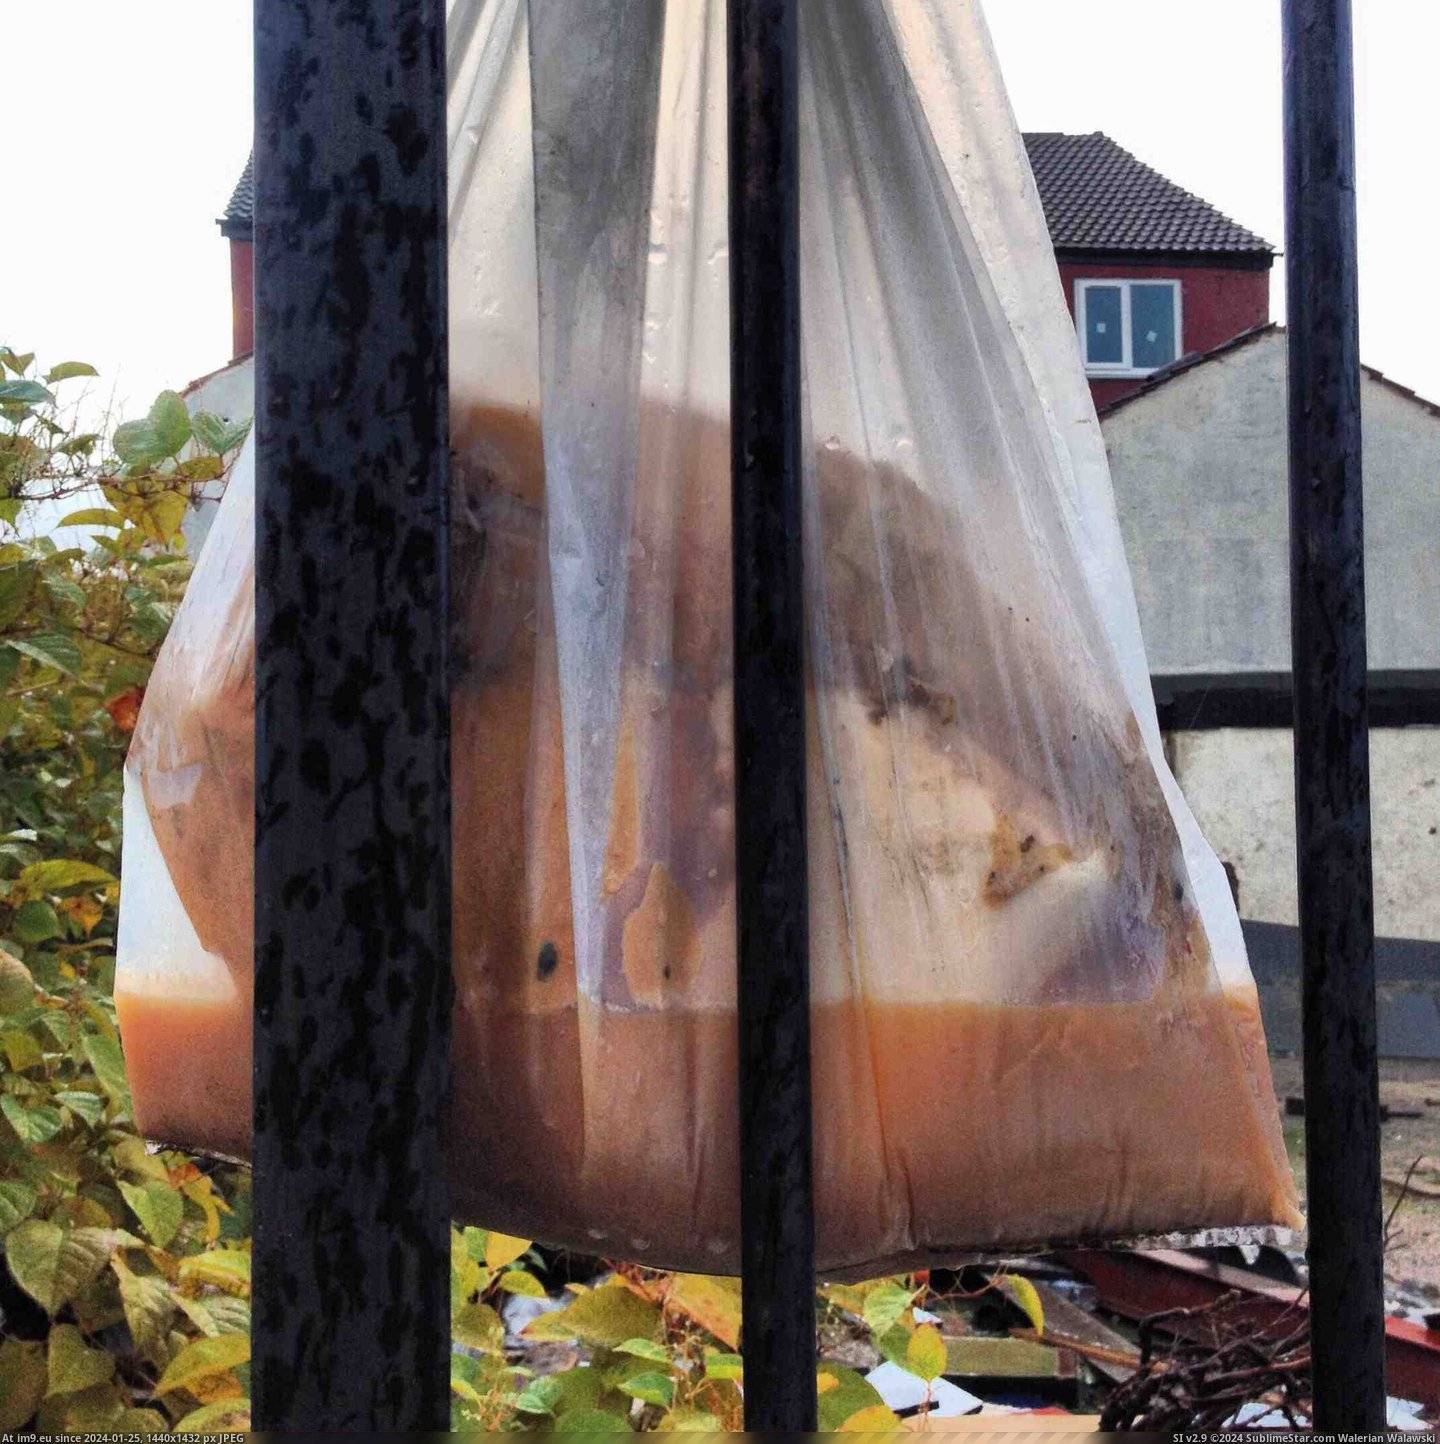 #Wtf #Saw #Railings #Hanging #Bag [Wtf] Saw this bag of WTF hanging on some railings Pic. (Image of album My r/WTF favs))